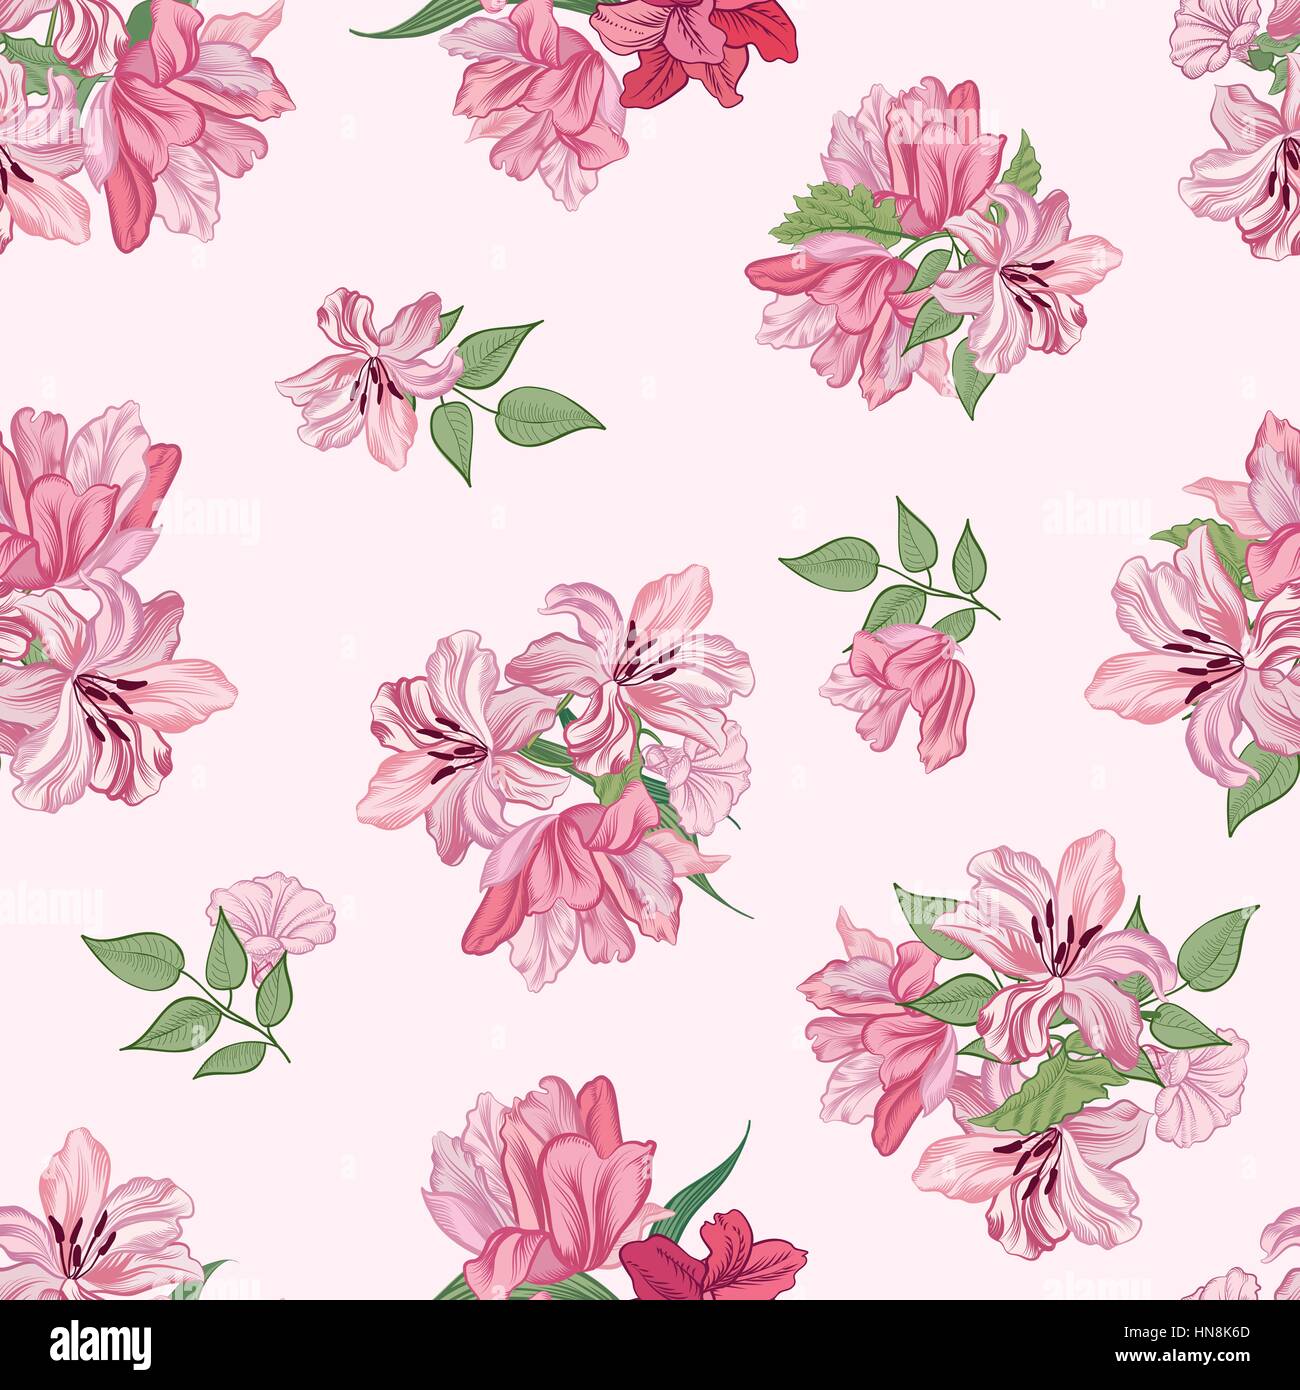 Floral seamless background Flower pattern. Stock Vector